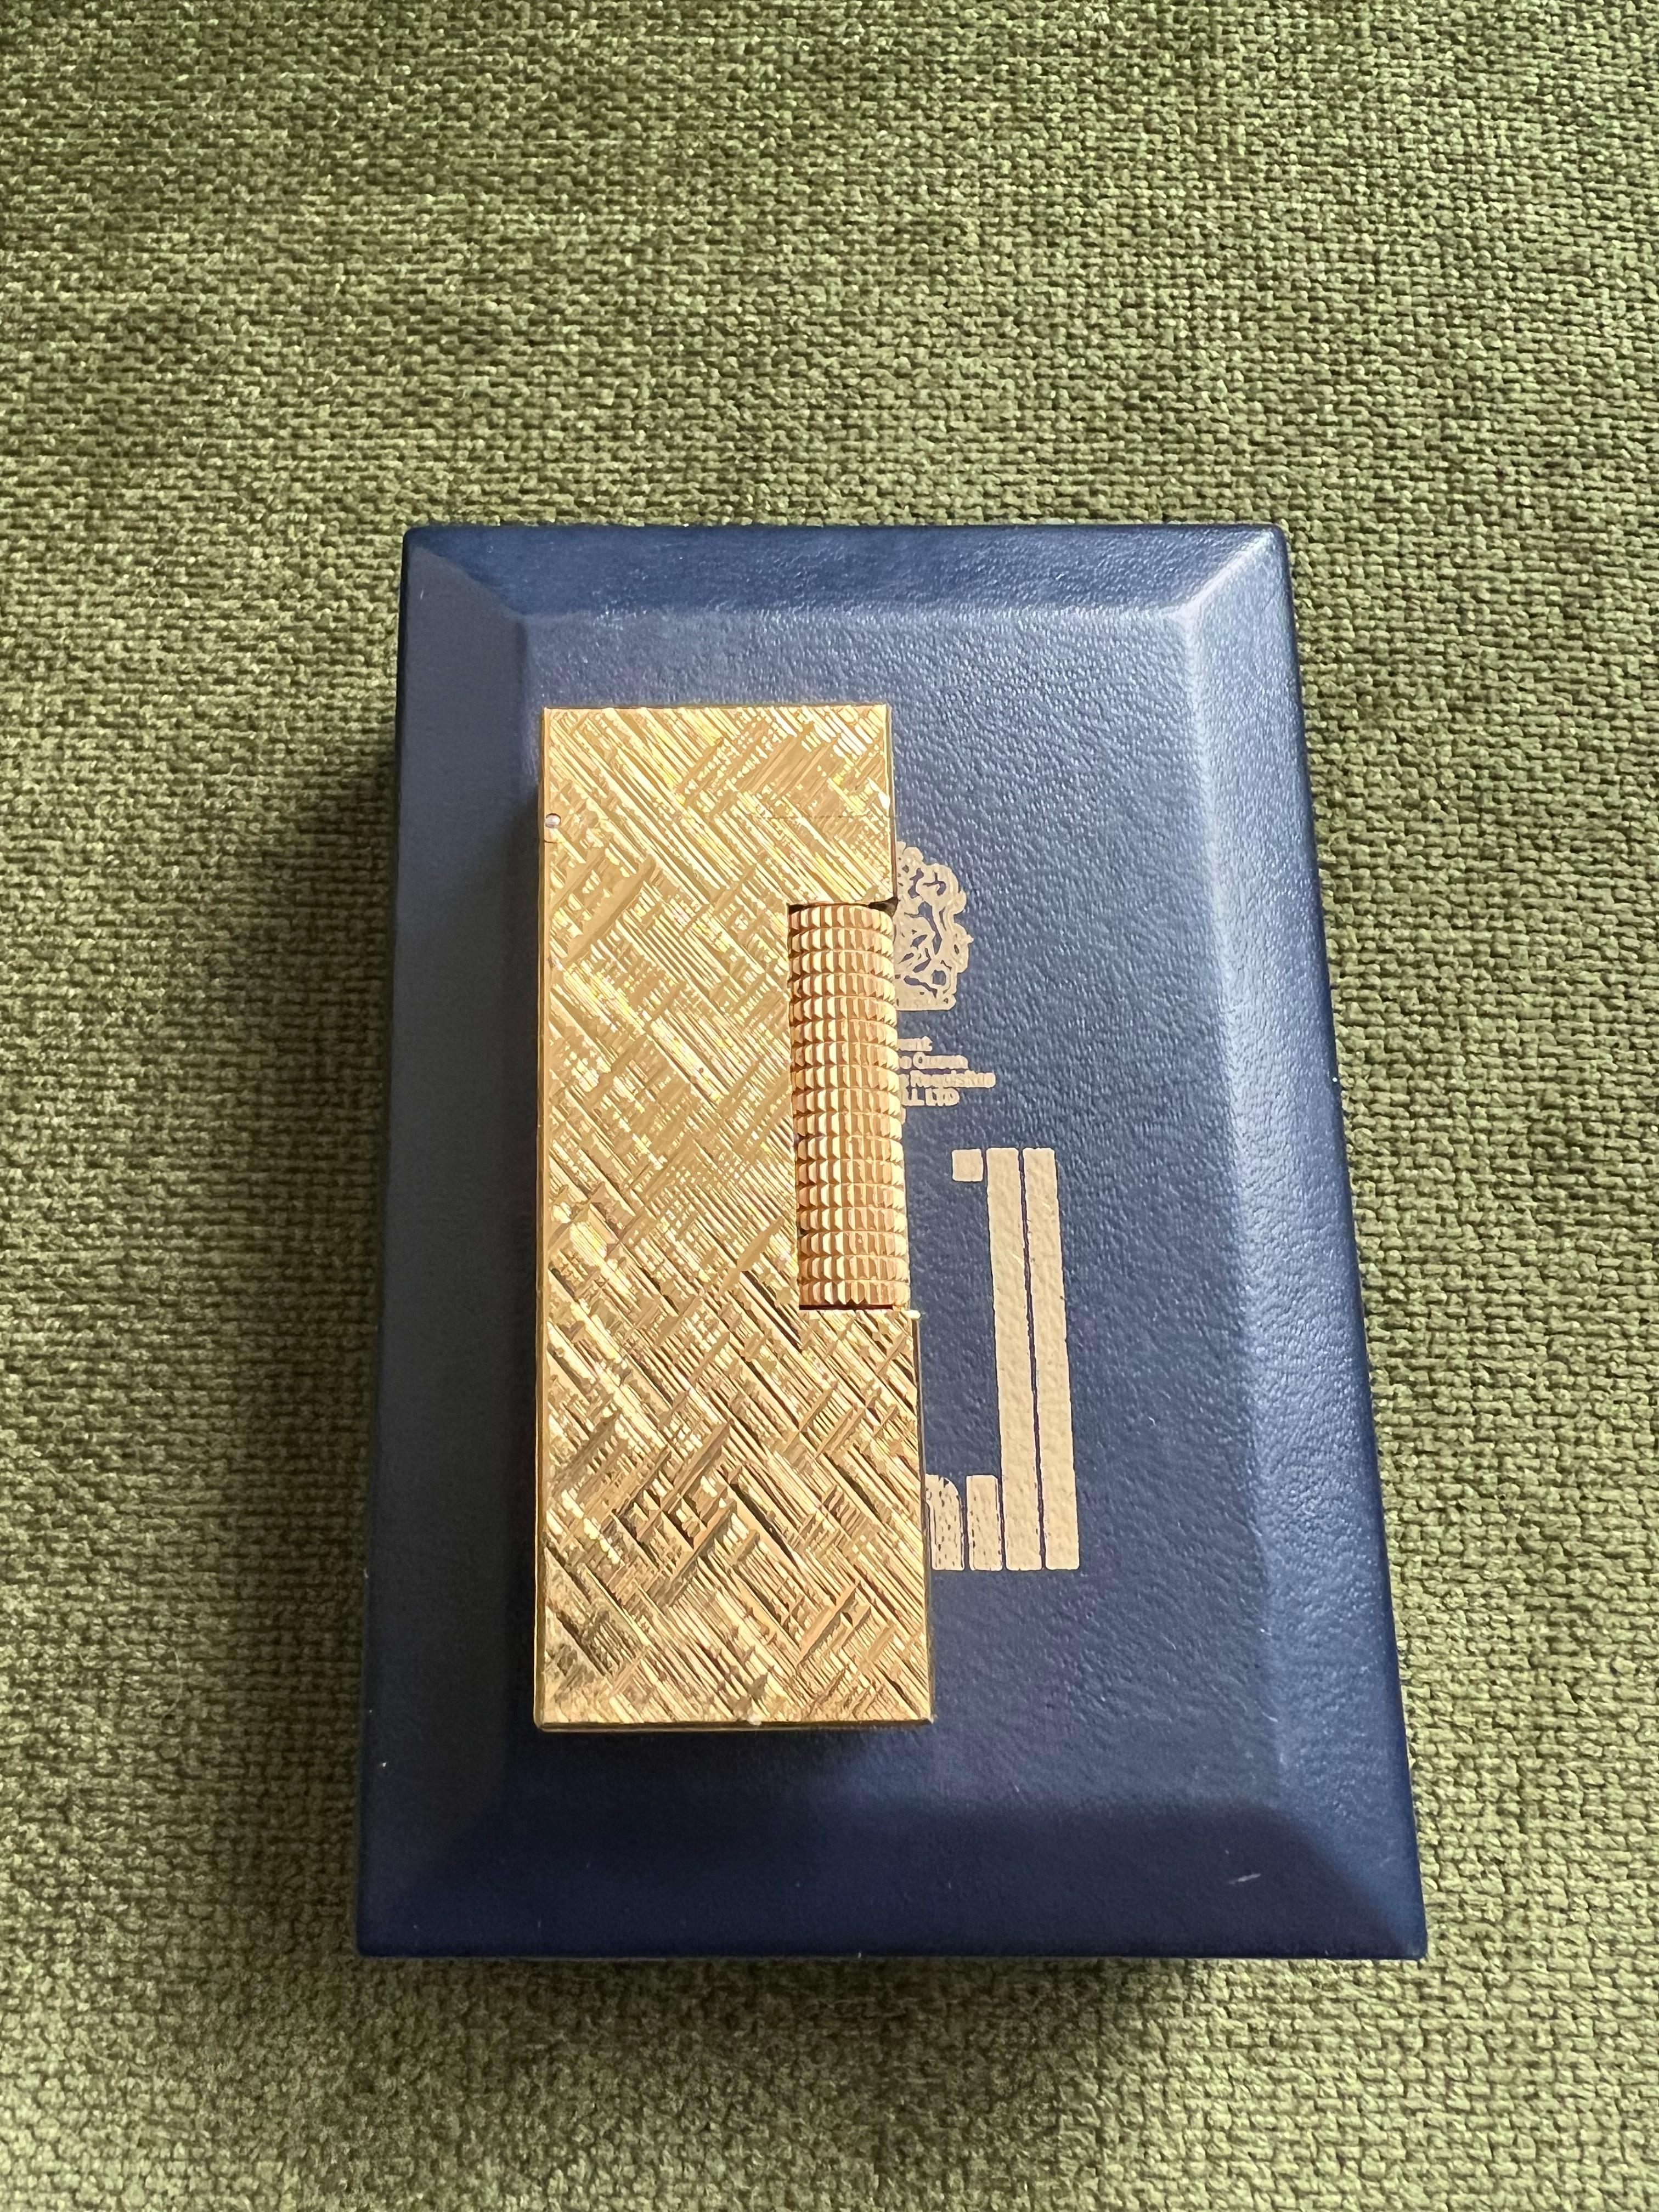 Rare Vintage Dunhill gold plated Swiss Made lighter 
In mint condition.
Art Deco. 
Works perfectly. 
Iconic and beautifully engineered piece rare condition, 
James Bond lighter of choice.
In original box which is Sky blue box.
Original paper